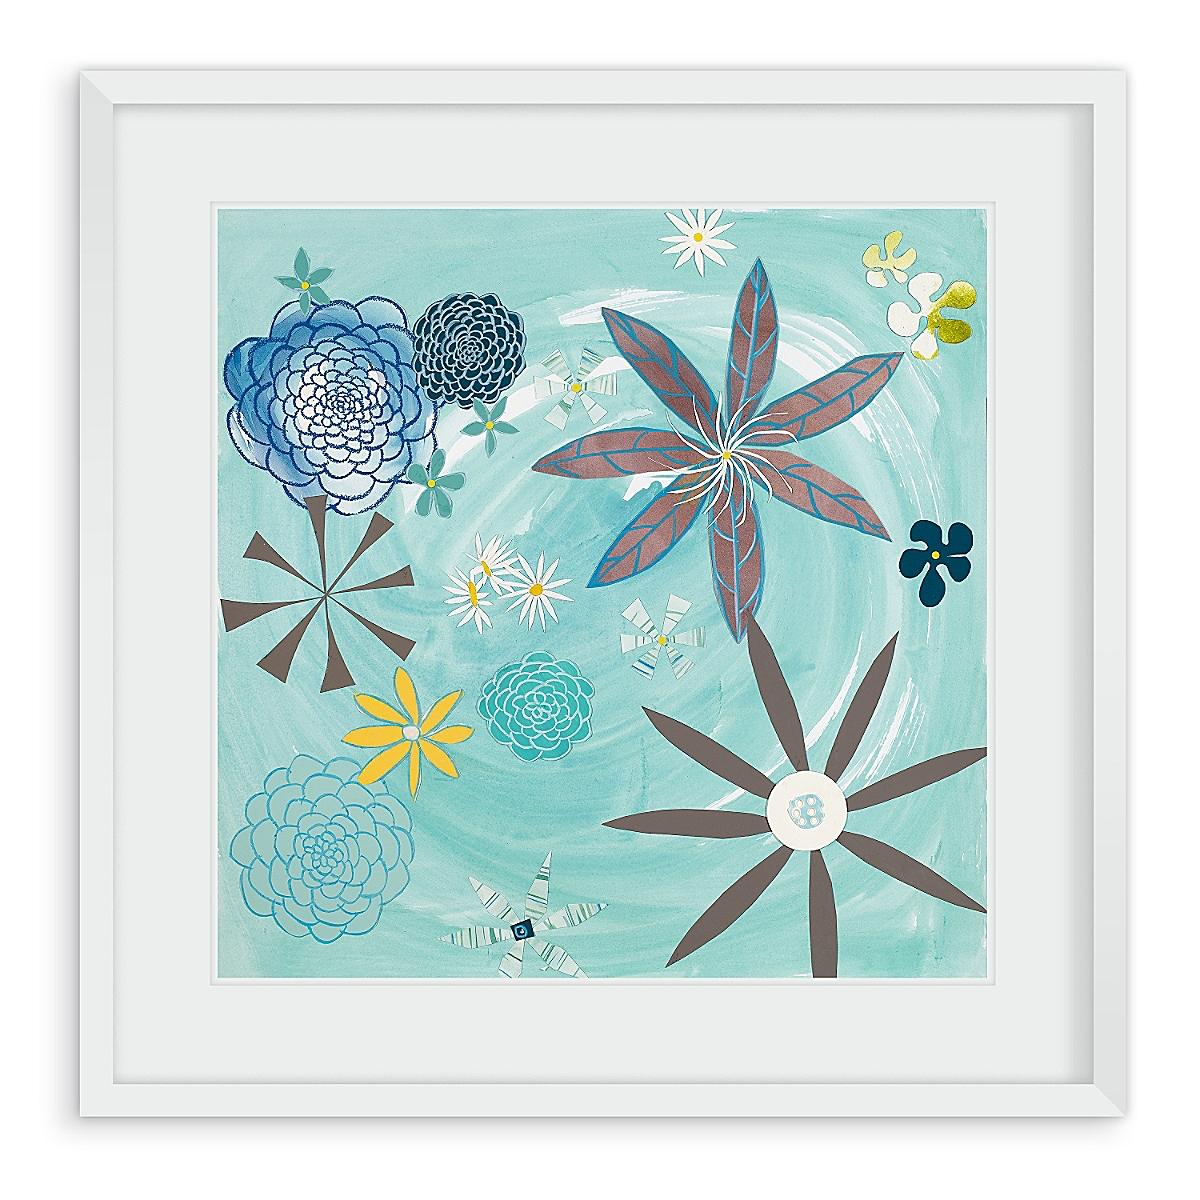 Maine Cottage Daisy Blue by Liz Lind for Maine Cottage® 